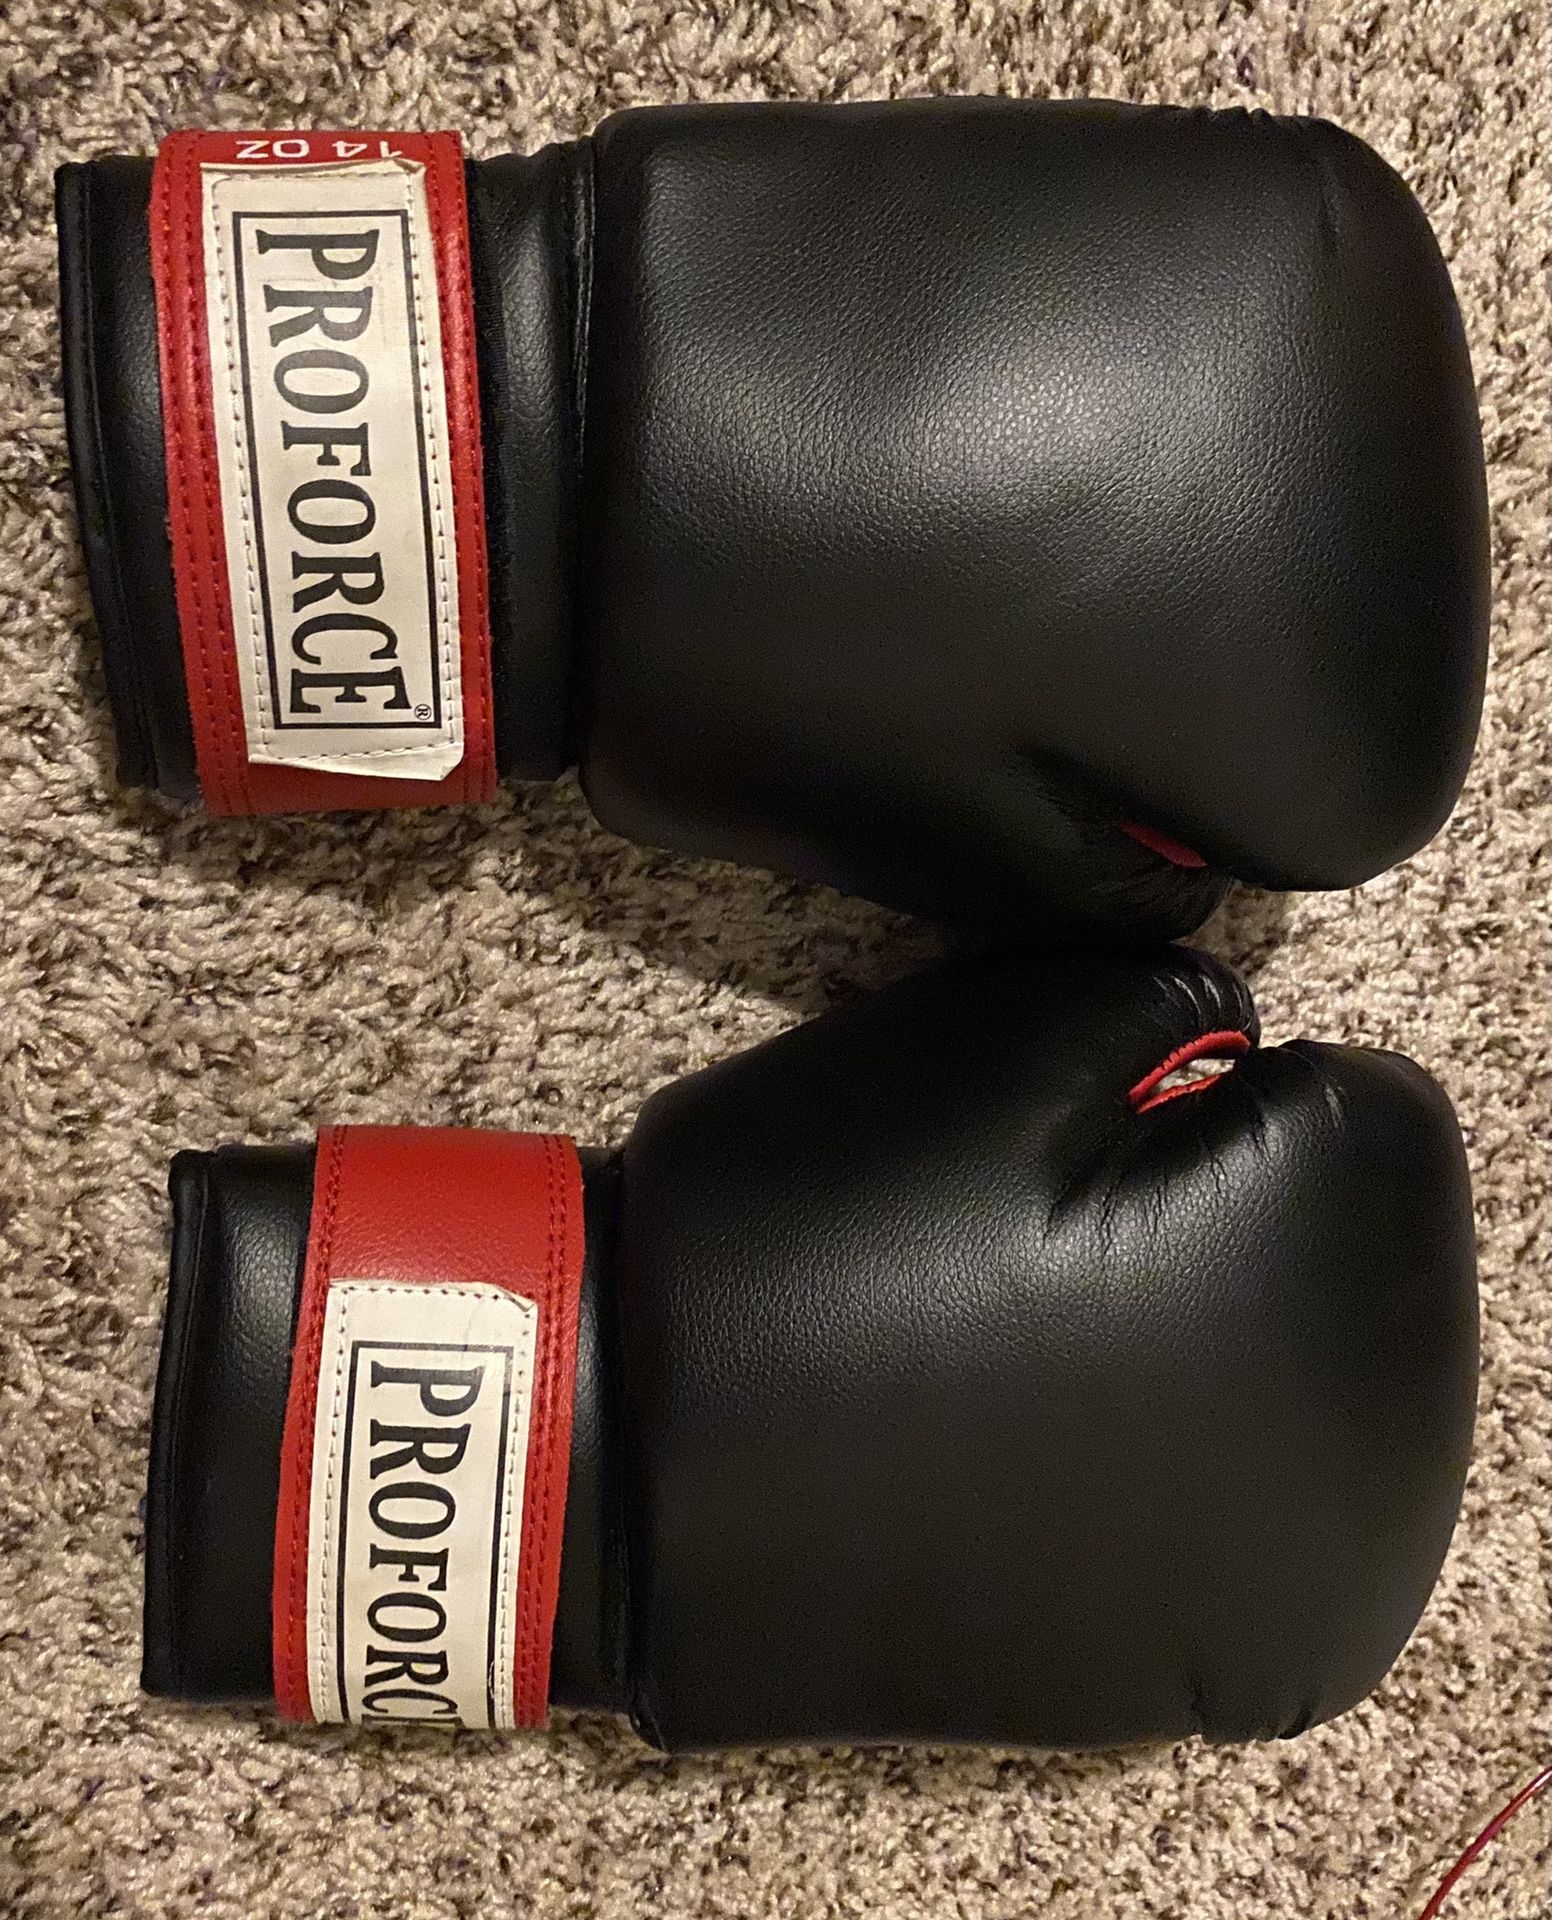 Pro force boxing gloves